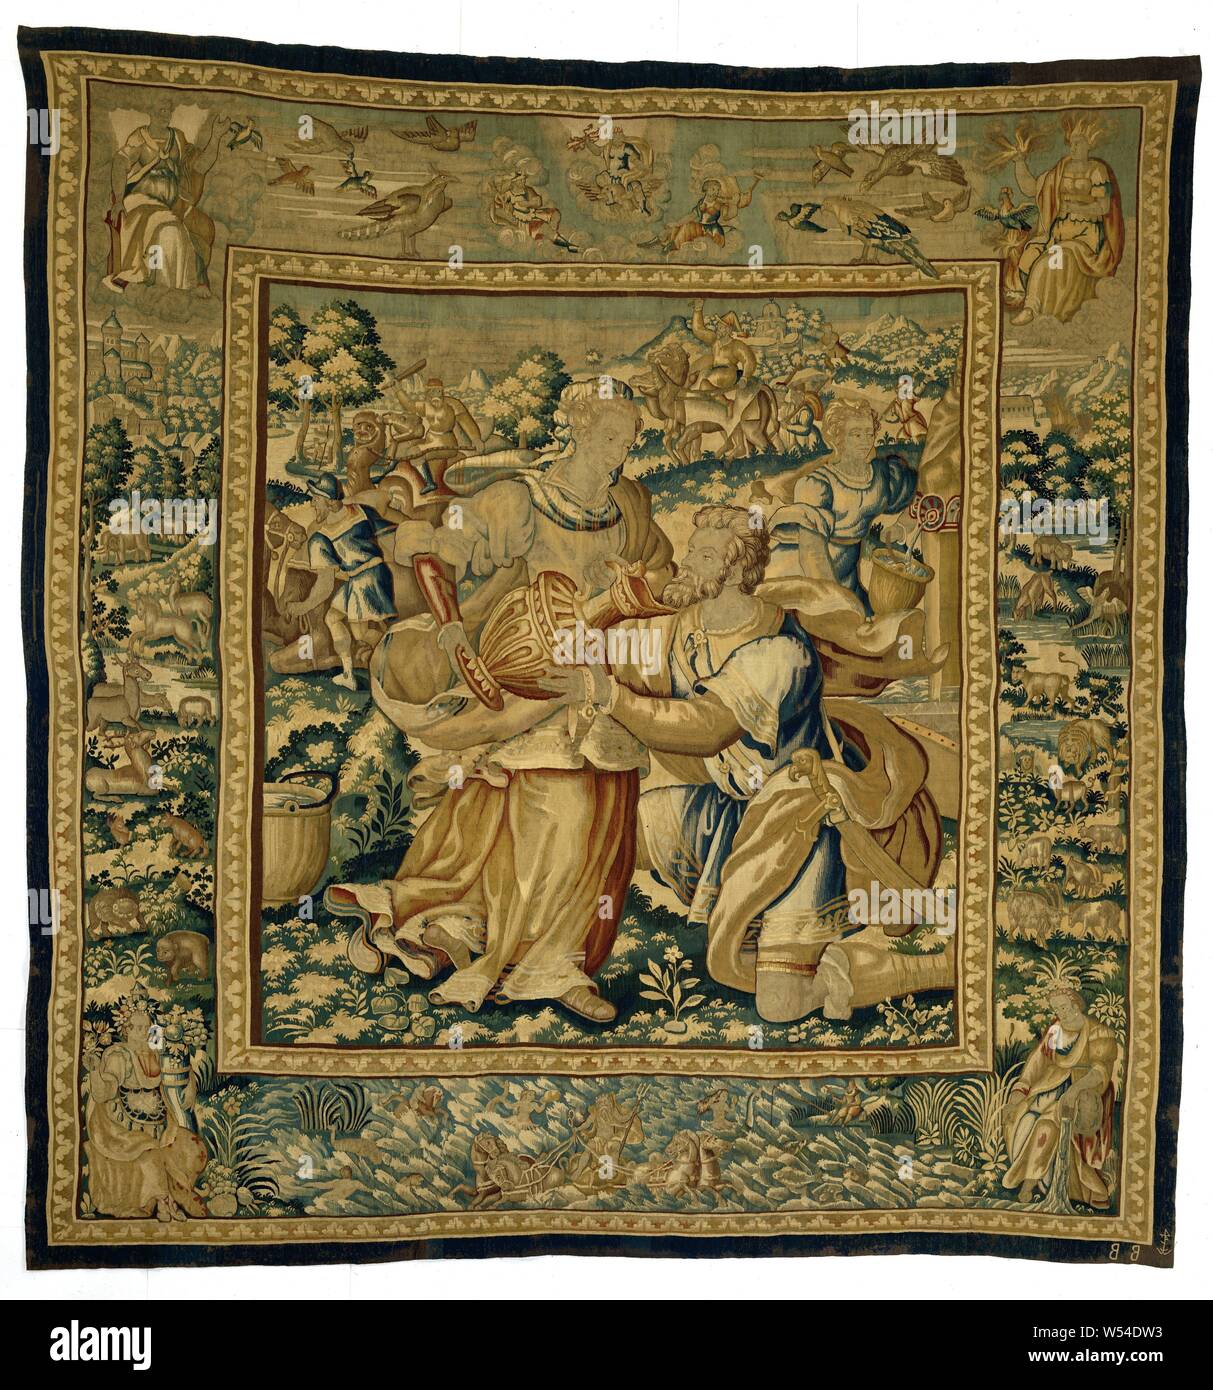 Rebekah and Eliezer at the well The history of Rebekka and Eliezer (series title), Tapestry with Rebecca drinking Eliezer (Gen. 24:18), from a series of tapestries with Rebecca's history and Eliezer (Gen.24) with edges with animals and in the corners the four elements, with the weaver brand of Willem de Kempeneere., anonymous, Brussels, c. 1575 - c. 1600, ketting, inslag, tapestry, h 305.0 cm × w 299.0 cm Stock Photo